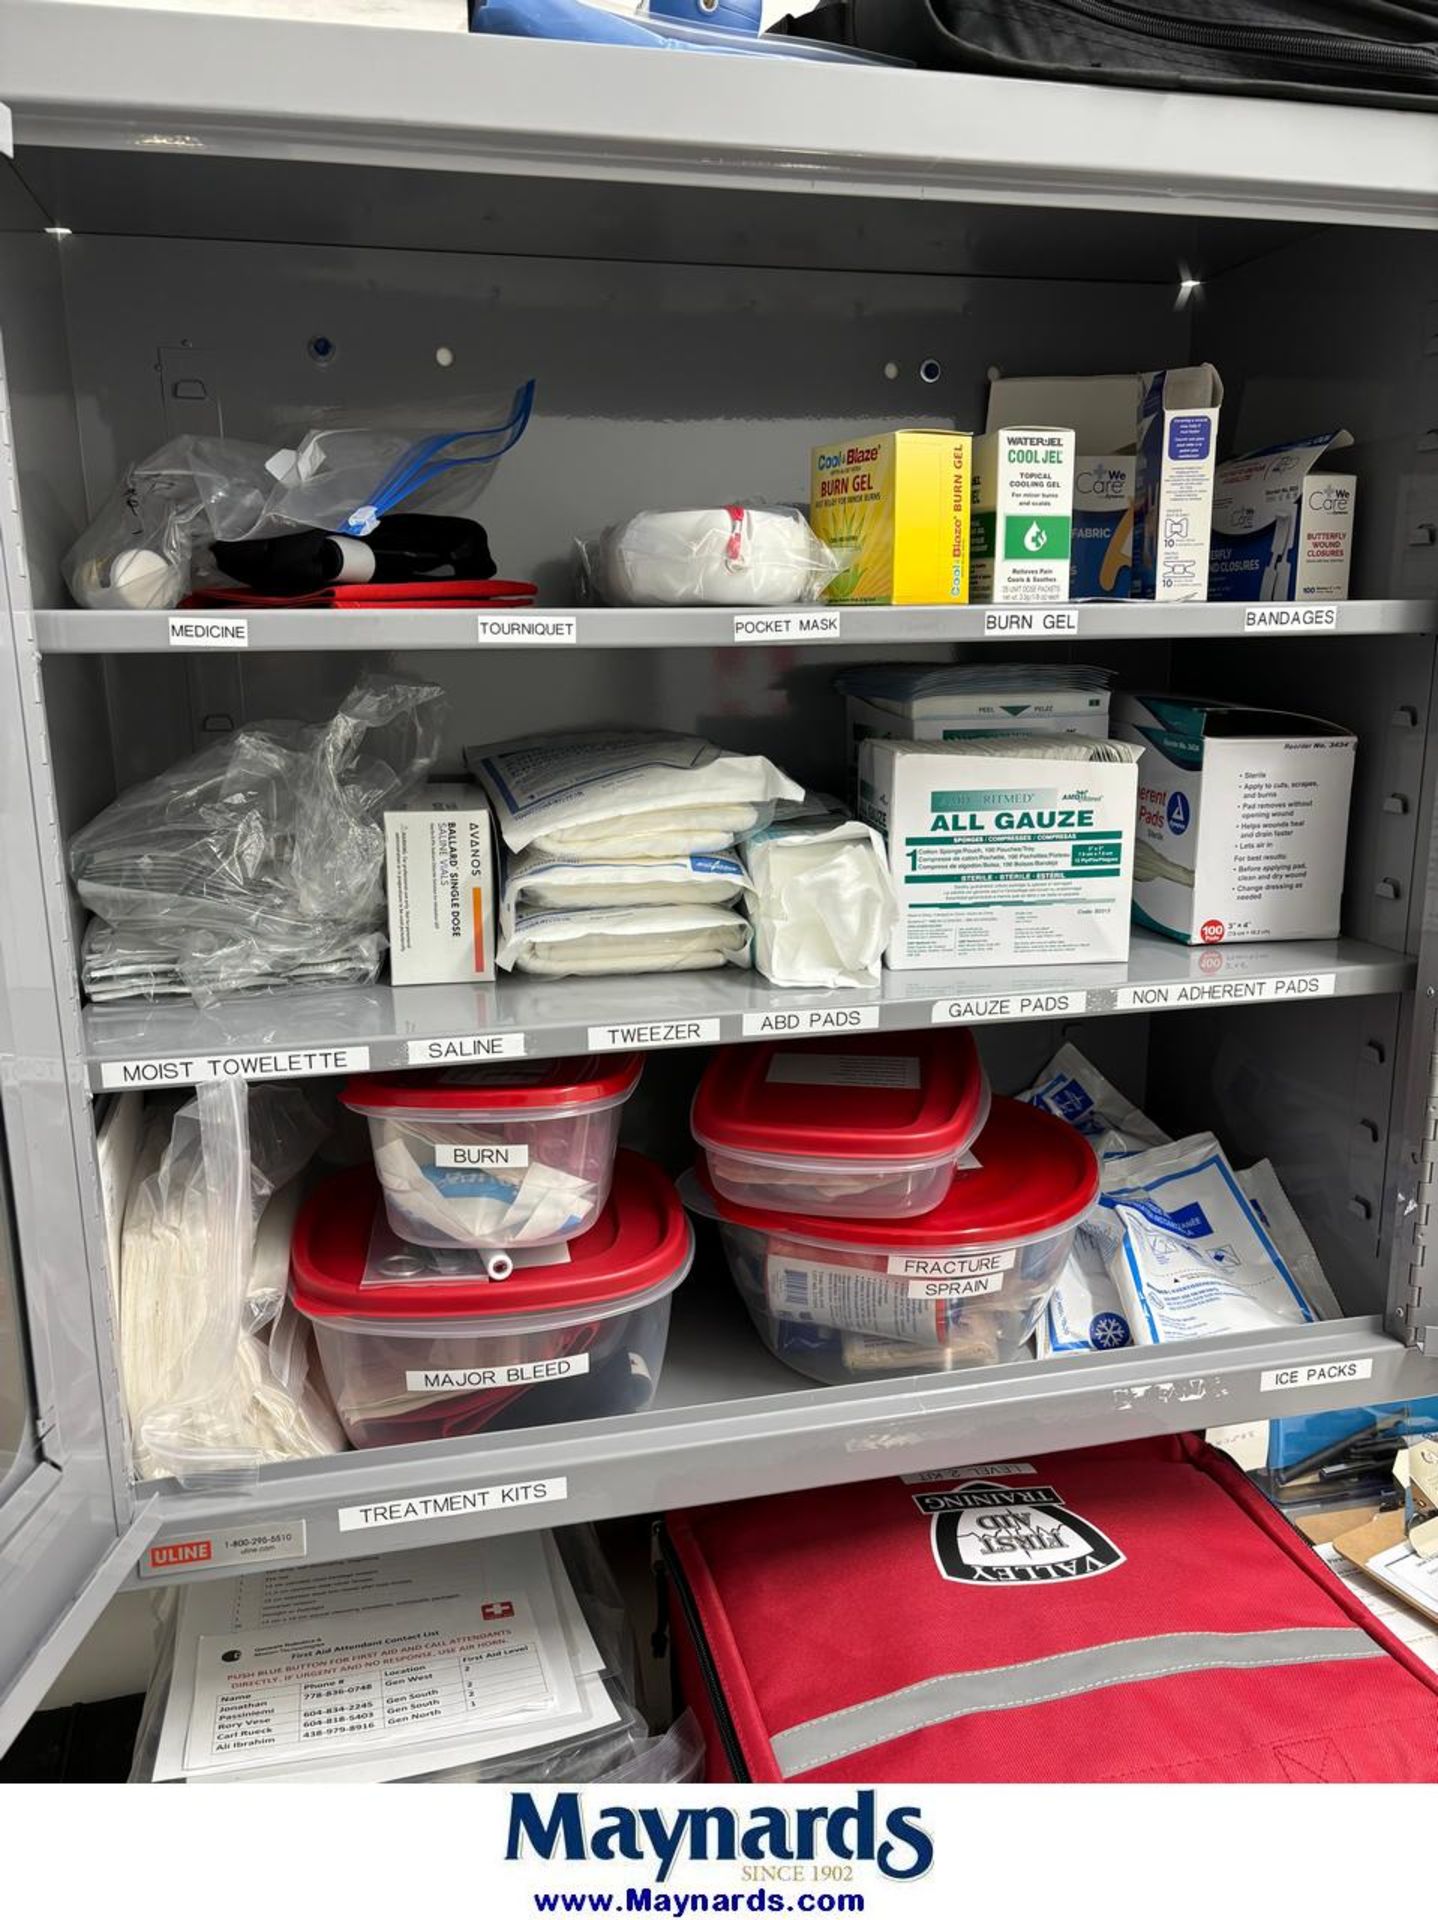 Contents of first aid room - Image 3 of 5